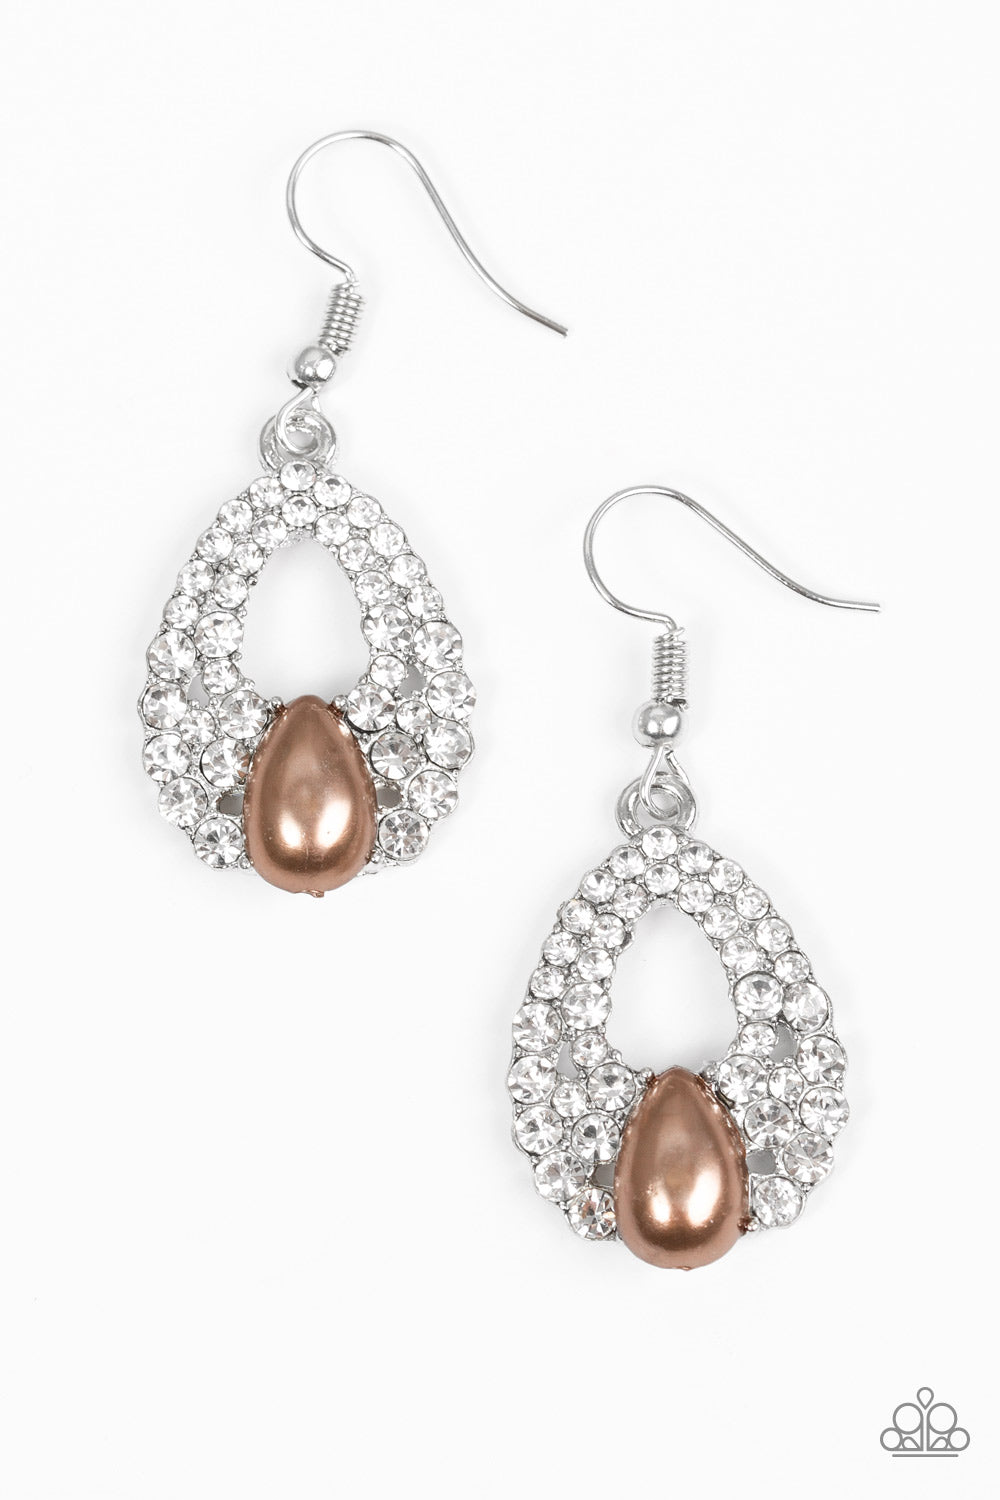 SHARE THE WEALTH - BROWN PEARL EARRINGS